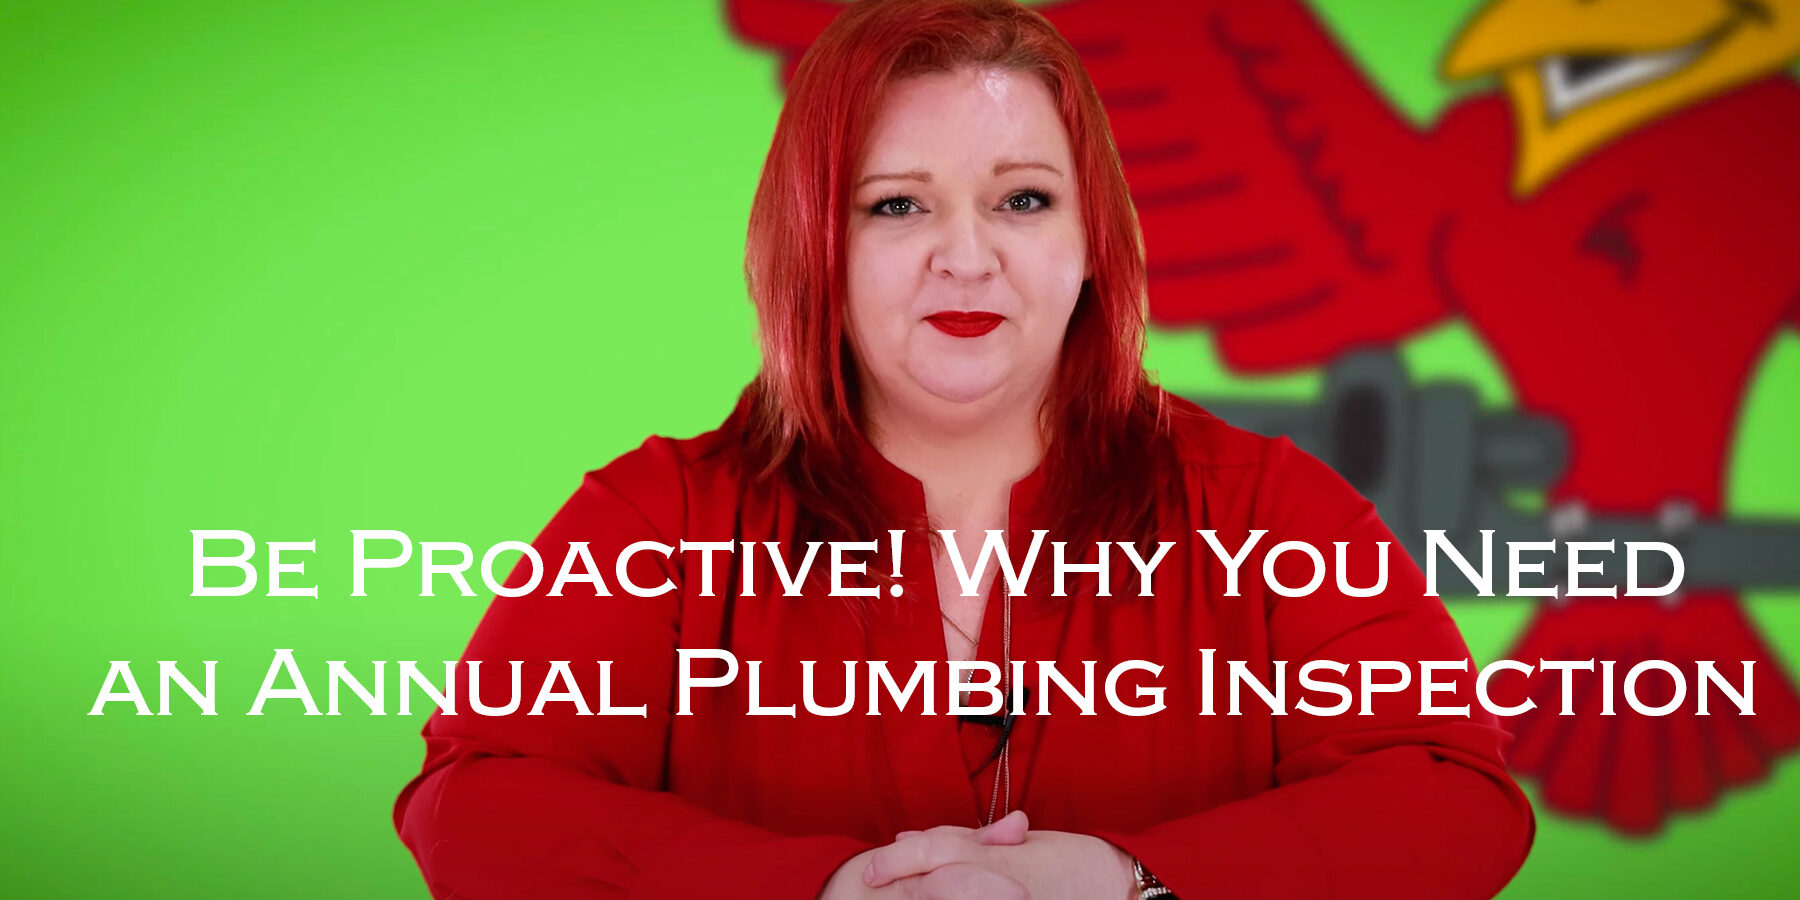 Image for robins plumbing blog titled "be-proactive-why-you-need-an-annual-plumbing-inspection"